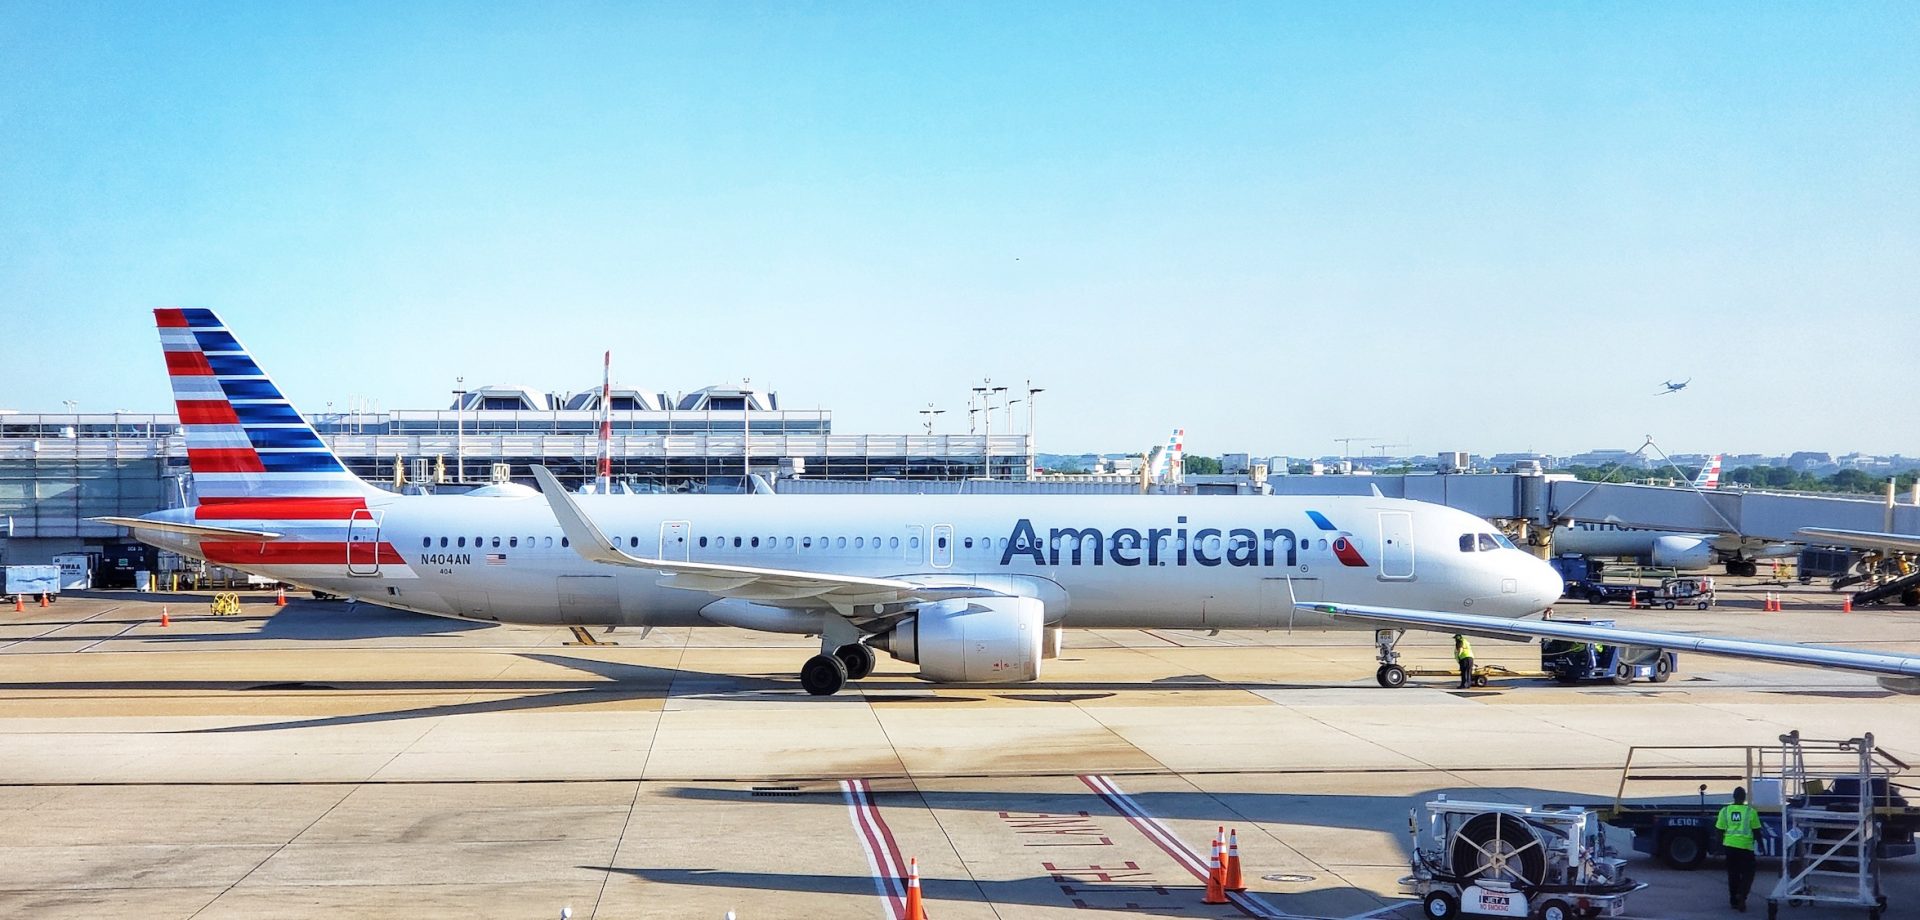 American Airlines plane at gate.